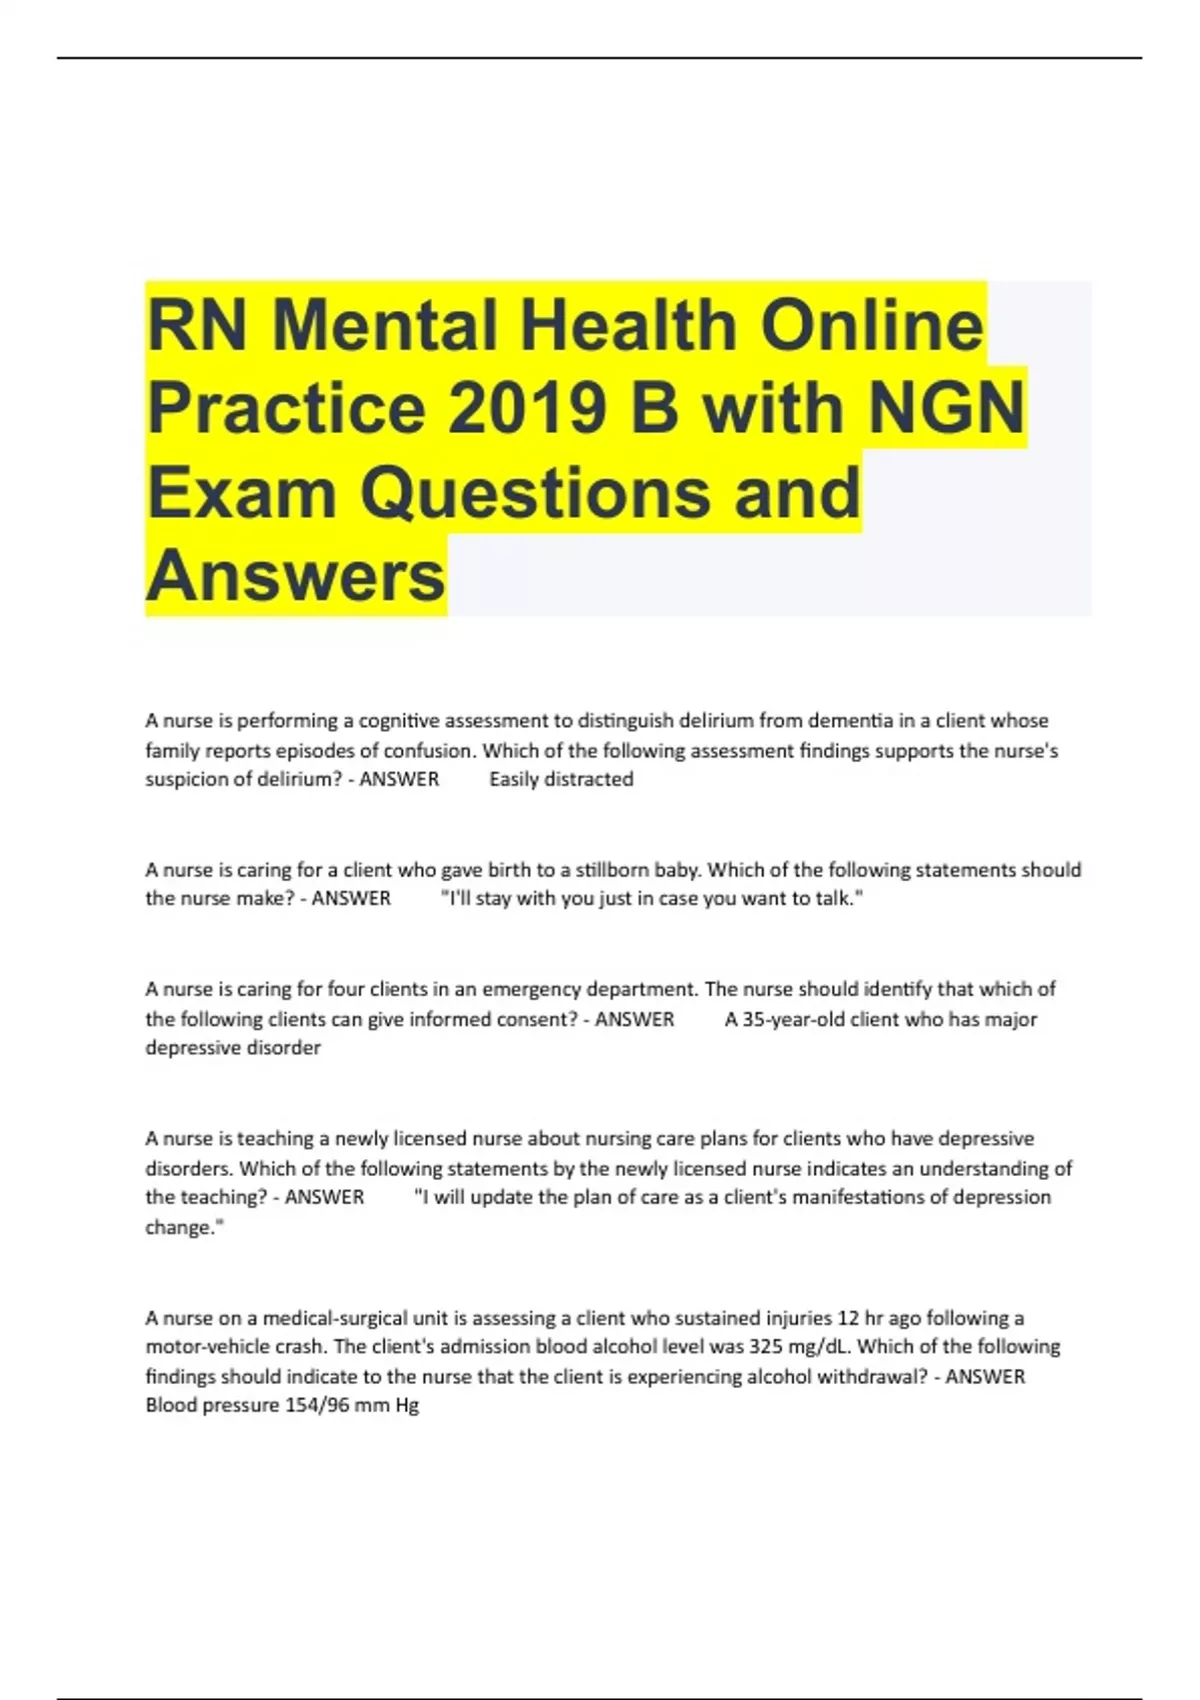 RN Mental Health Online Practice 2019 B with NGN Exam Questions and